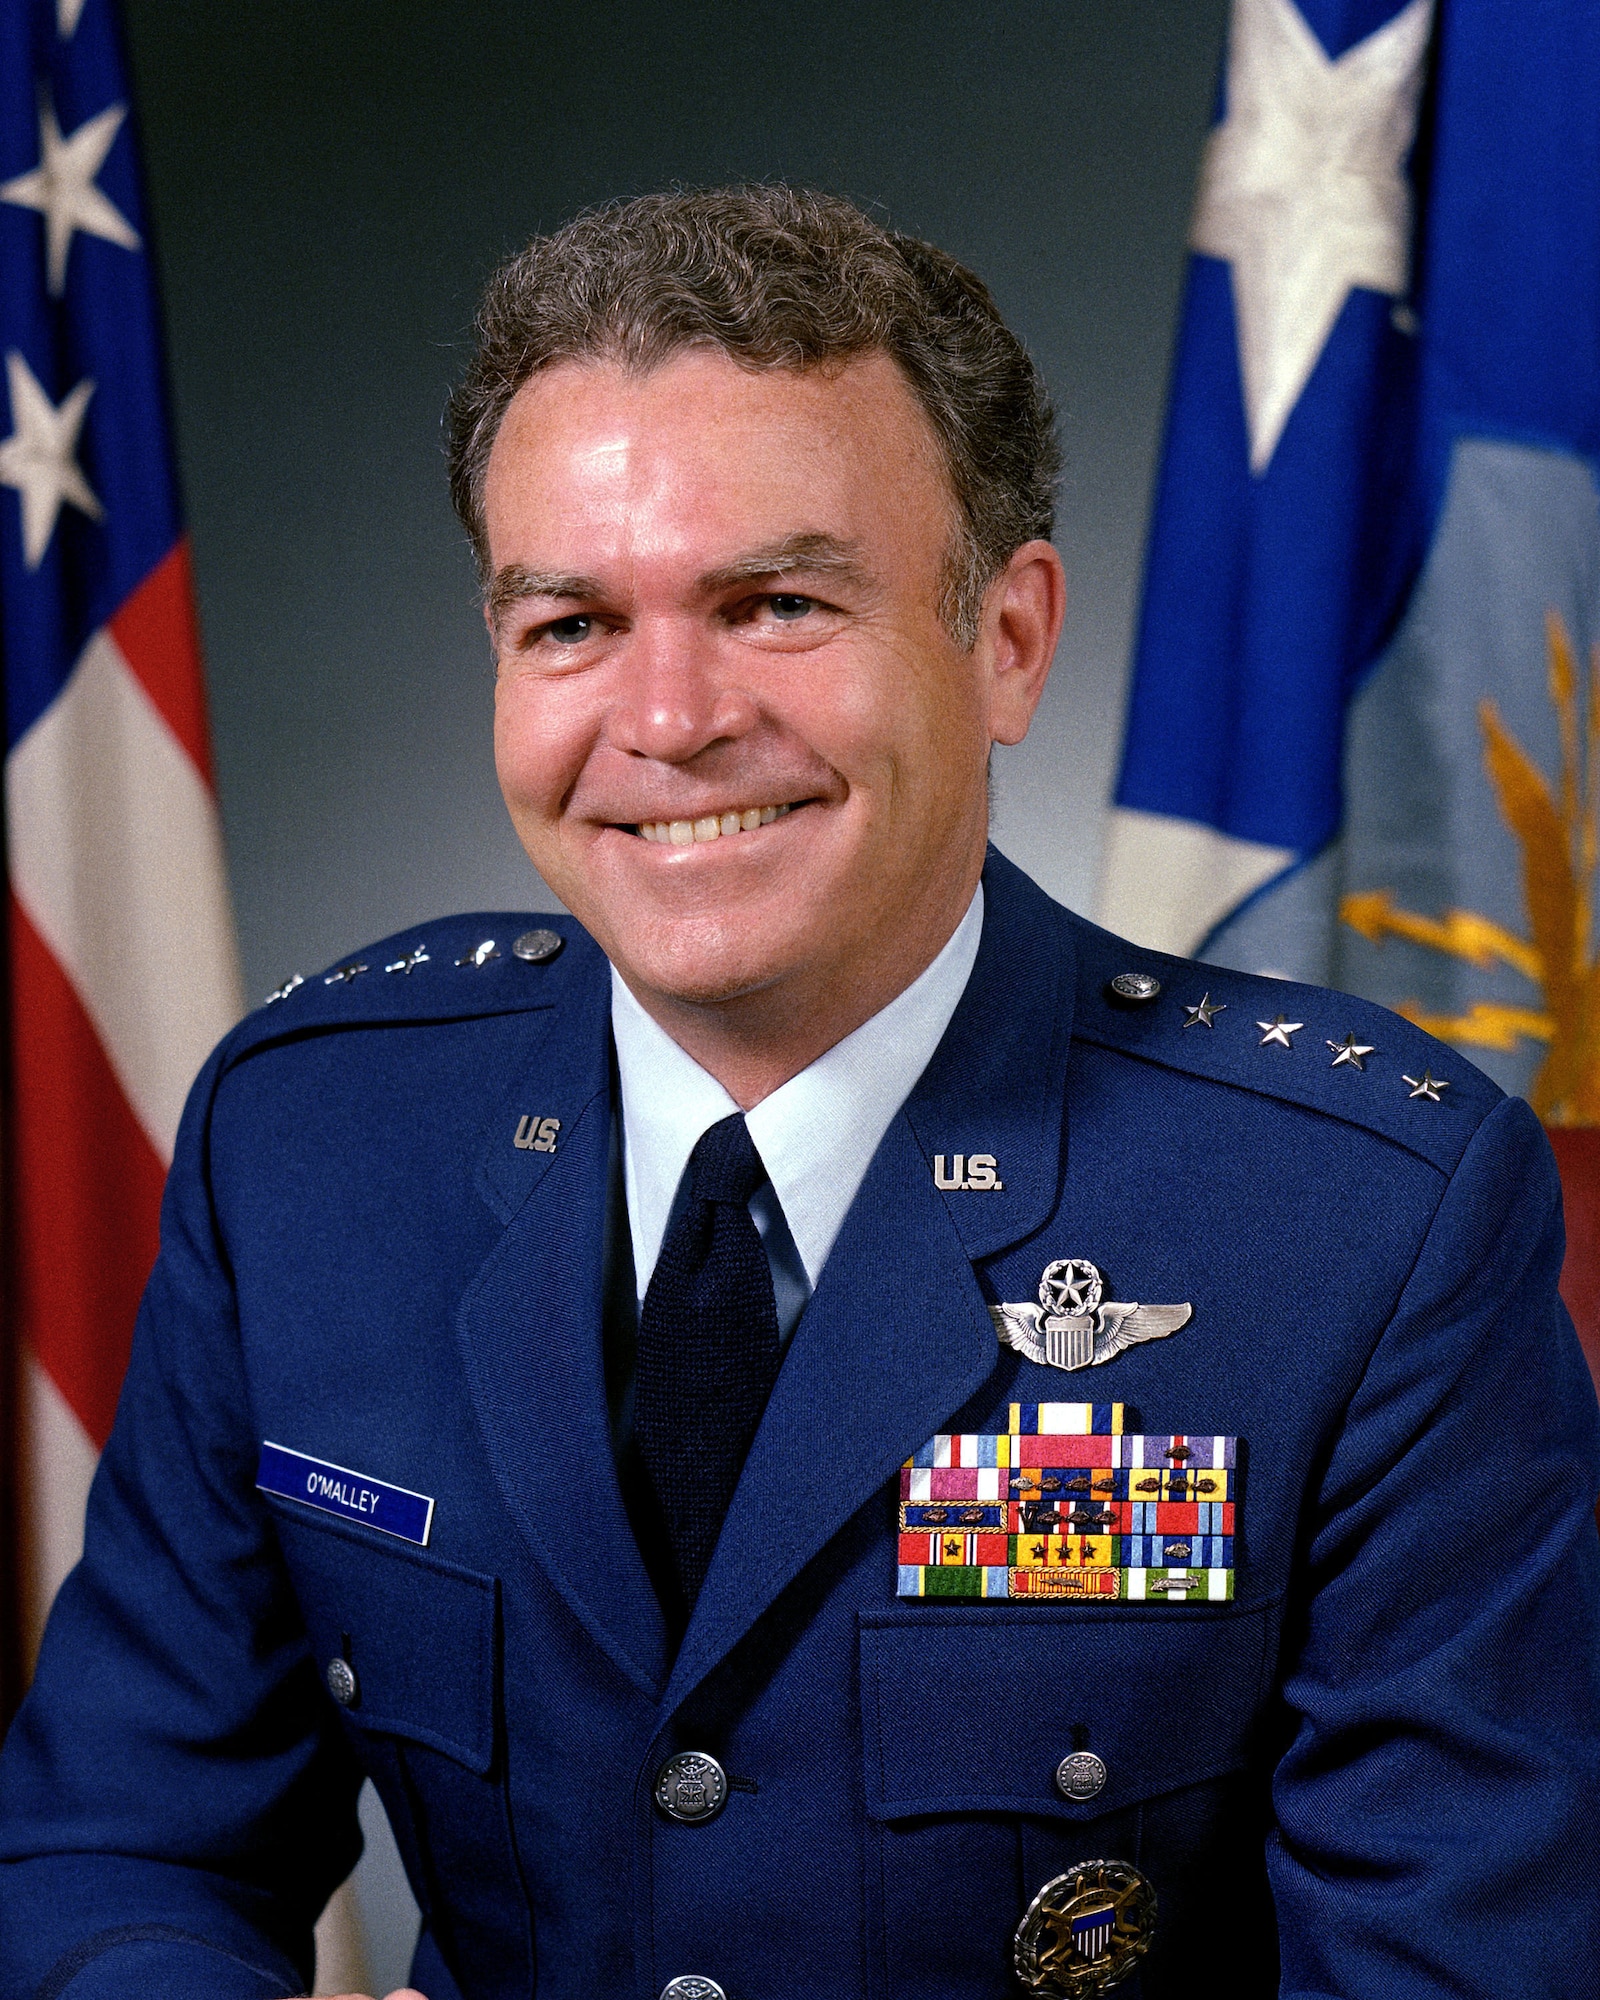 Official photo of Gen. Jerome O'Malley